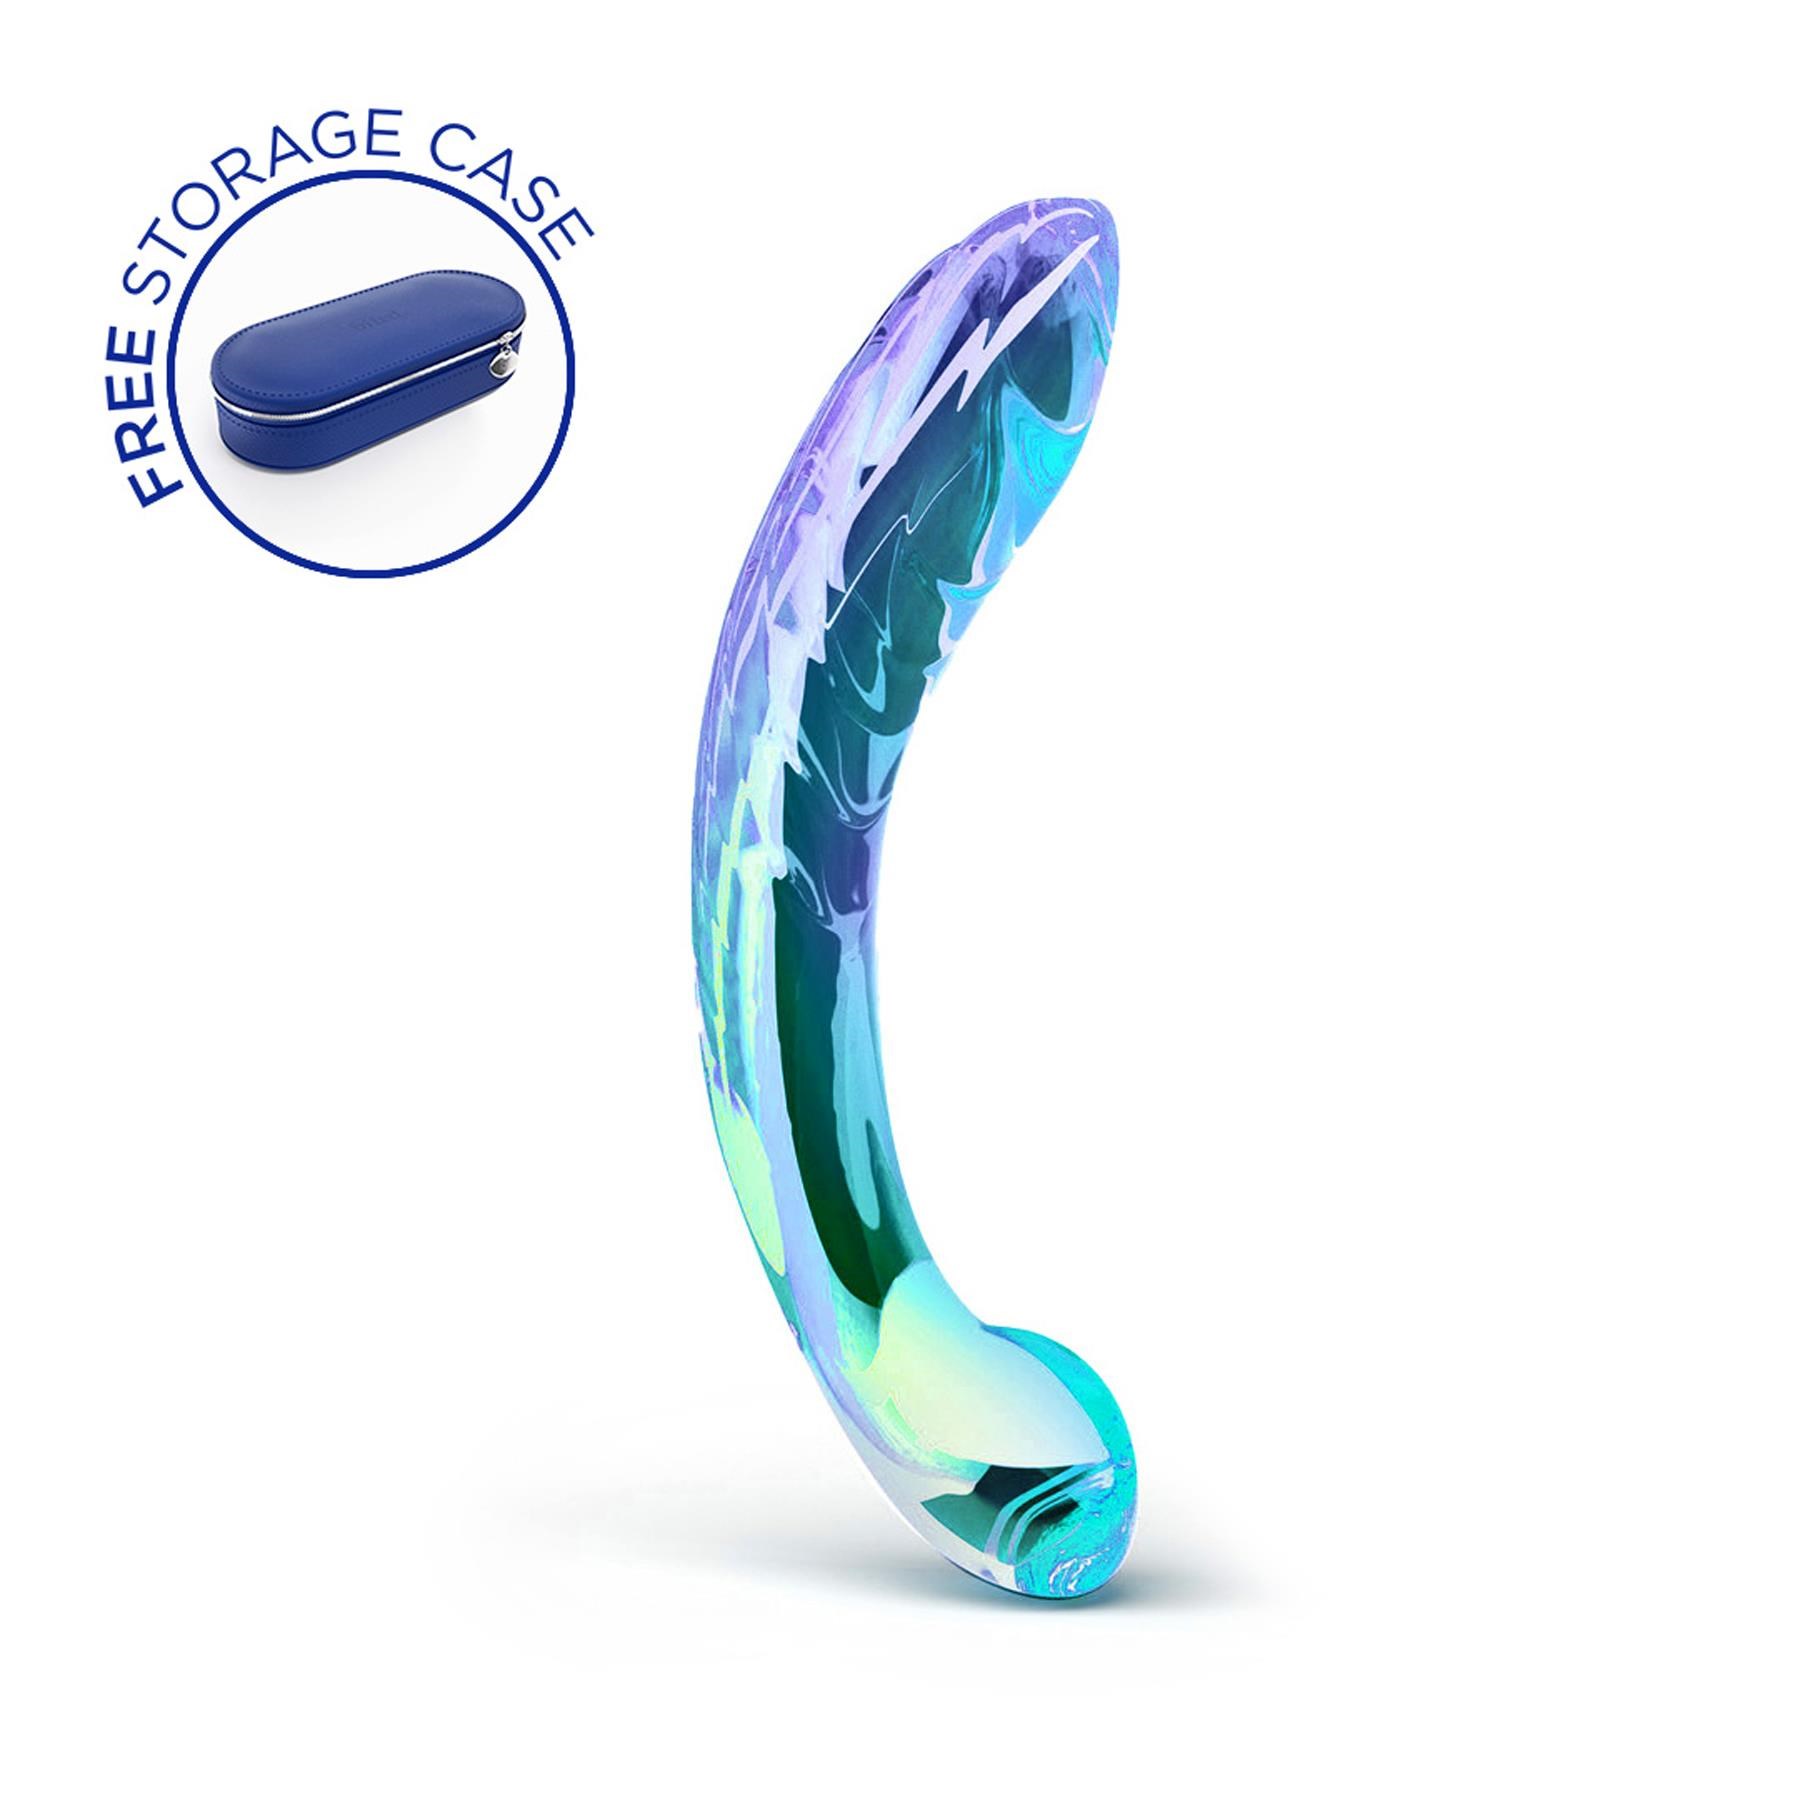 Biird Kalii Glass G-Spot Dildo - Product Shot with Storage Case